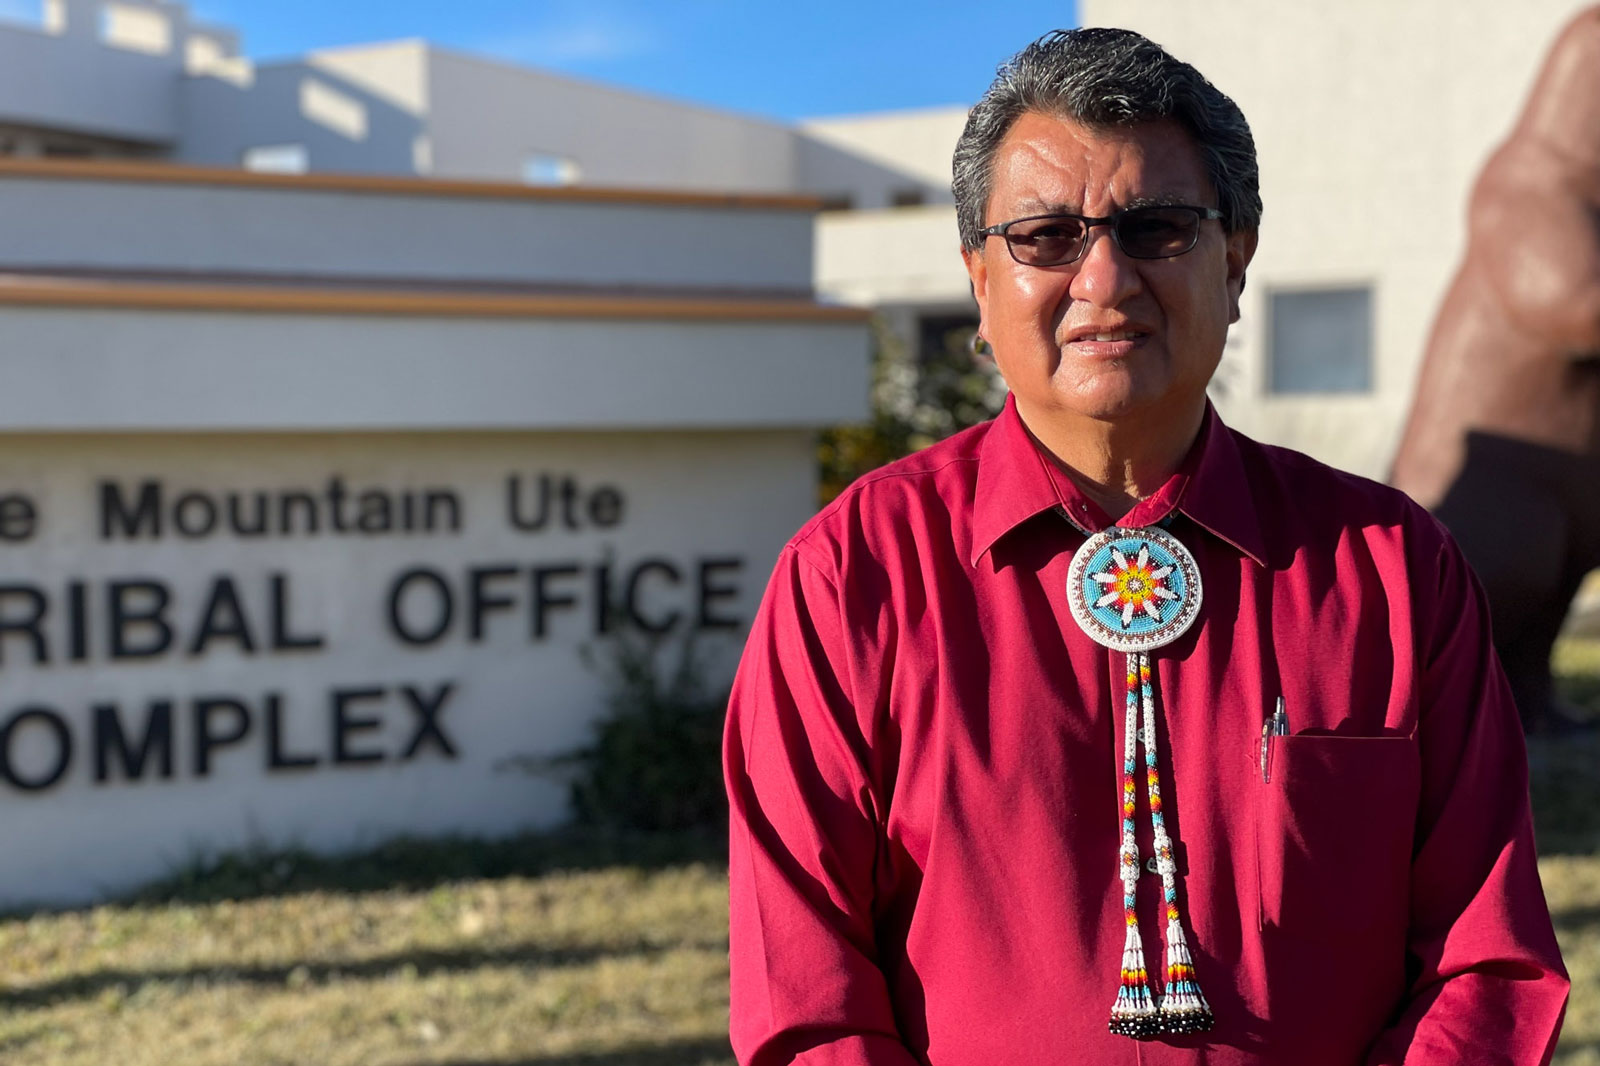 Chairman Manuel Heart of the Ute Mountain Ute Indian Tribe